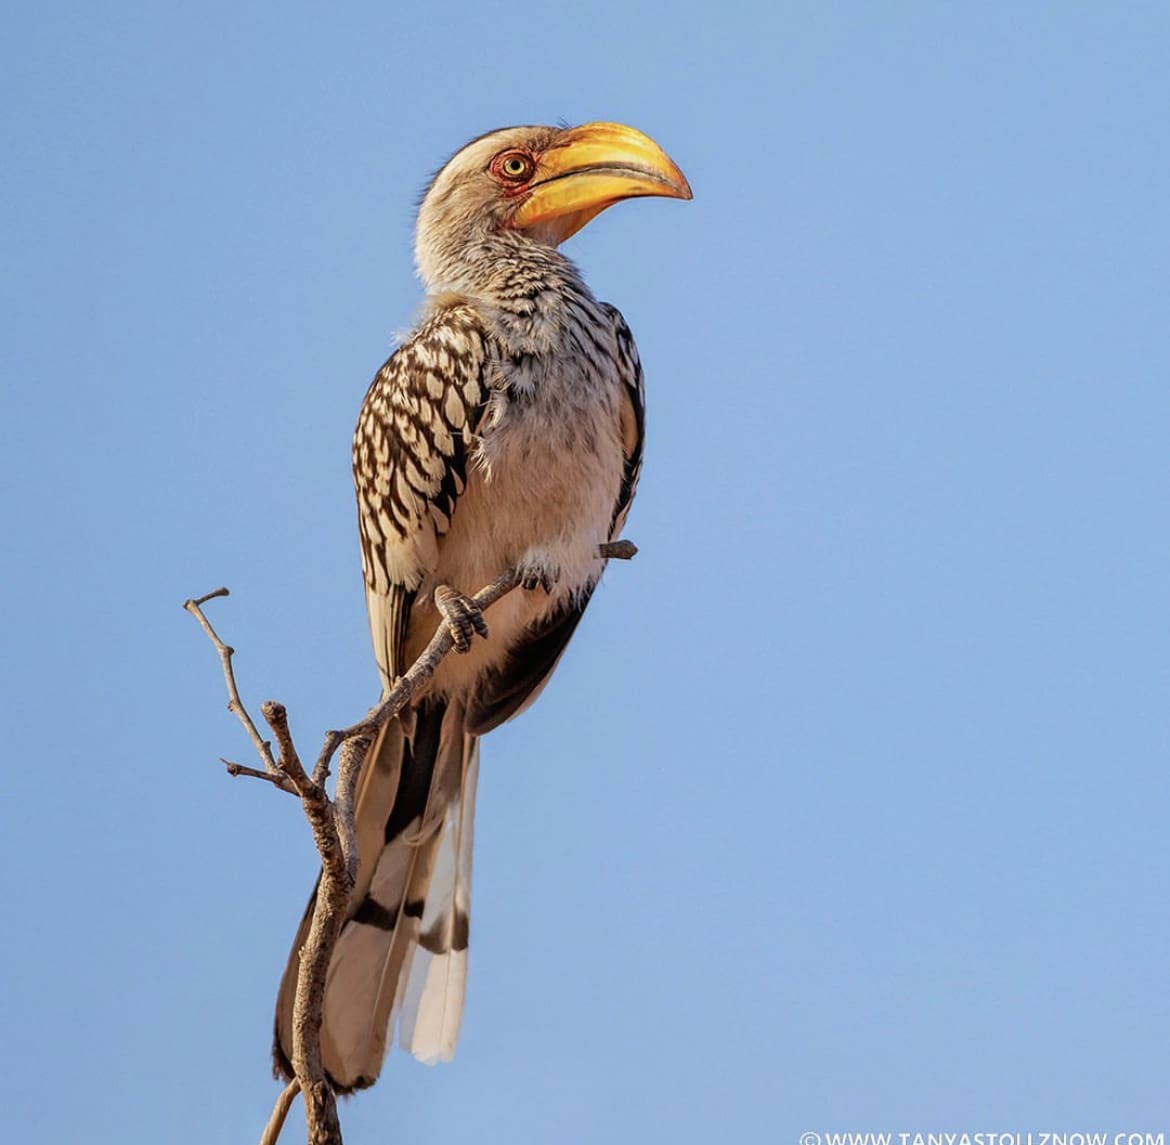 Southern Yellow-billed Hornbill, perched on a tree branch